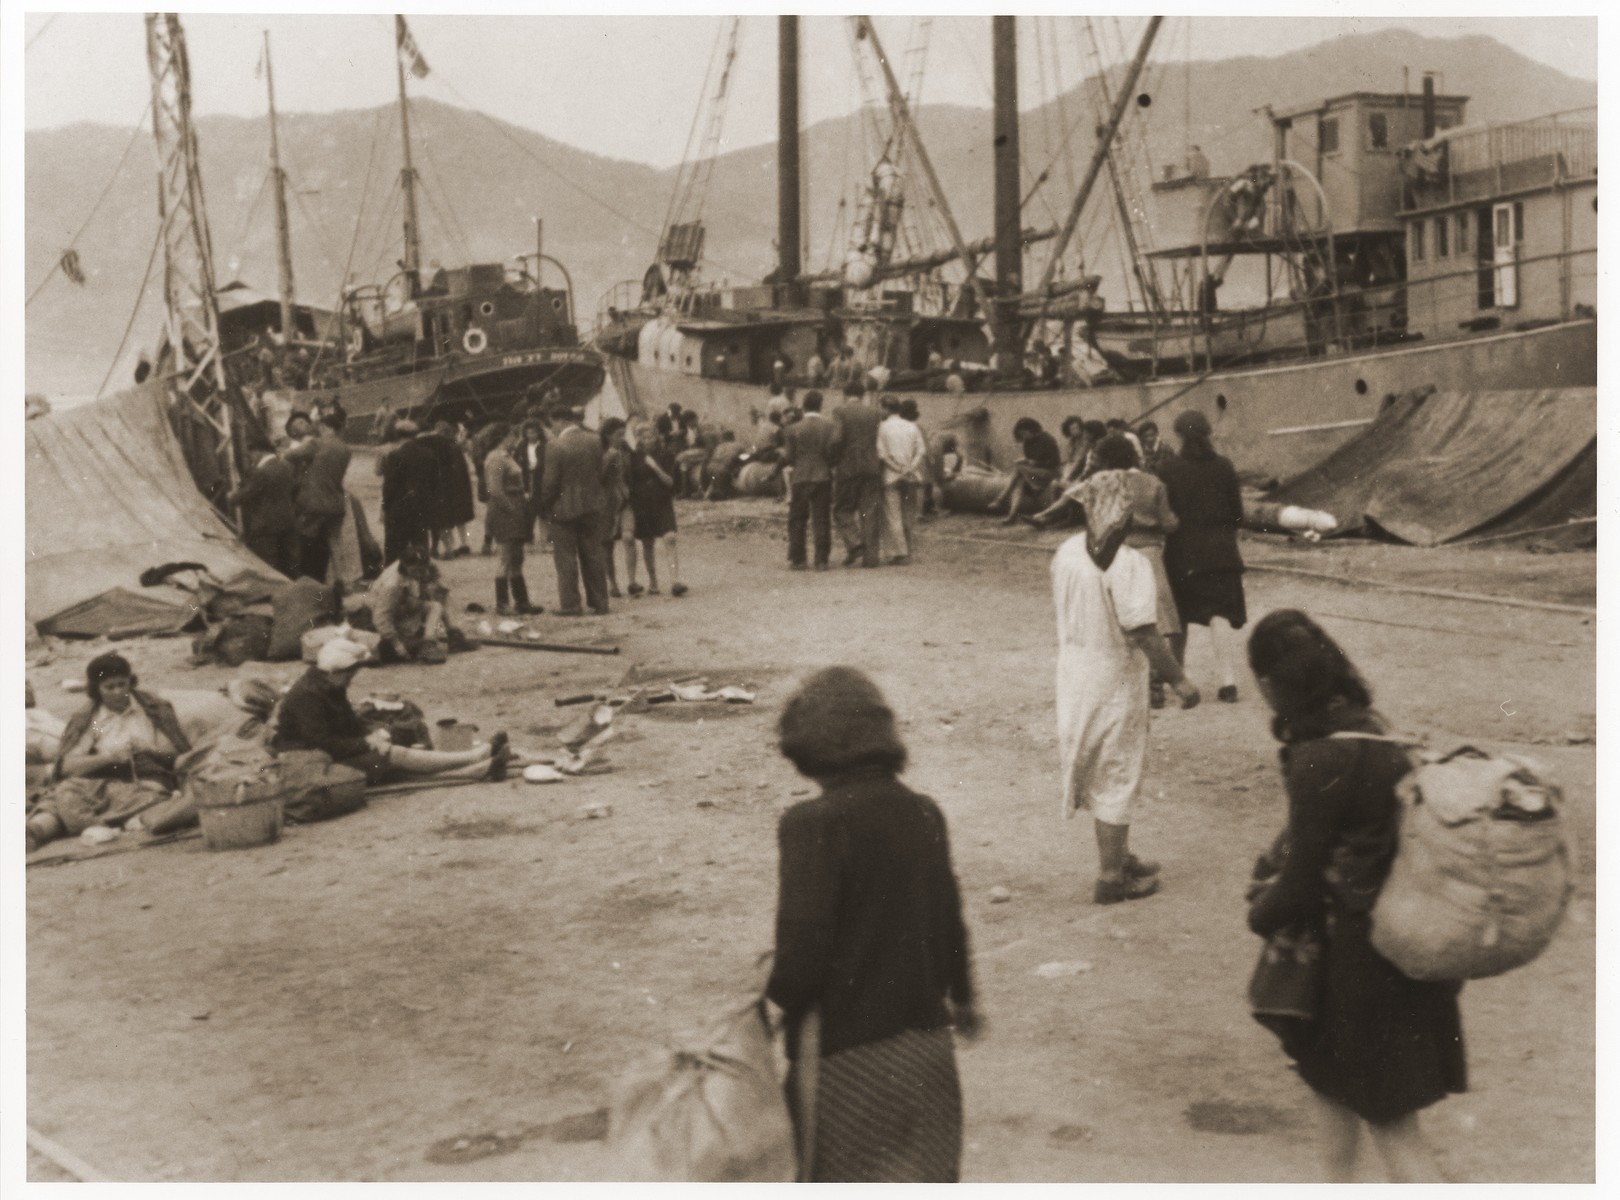 Jewish DPs camp out at the port of La Spezia while waiting for permission to sail to Palestine.